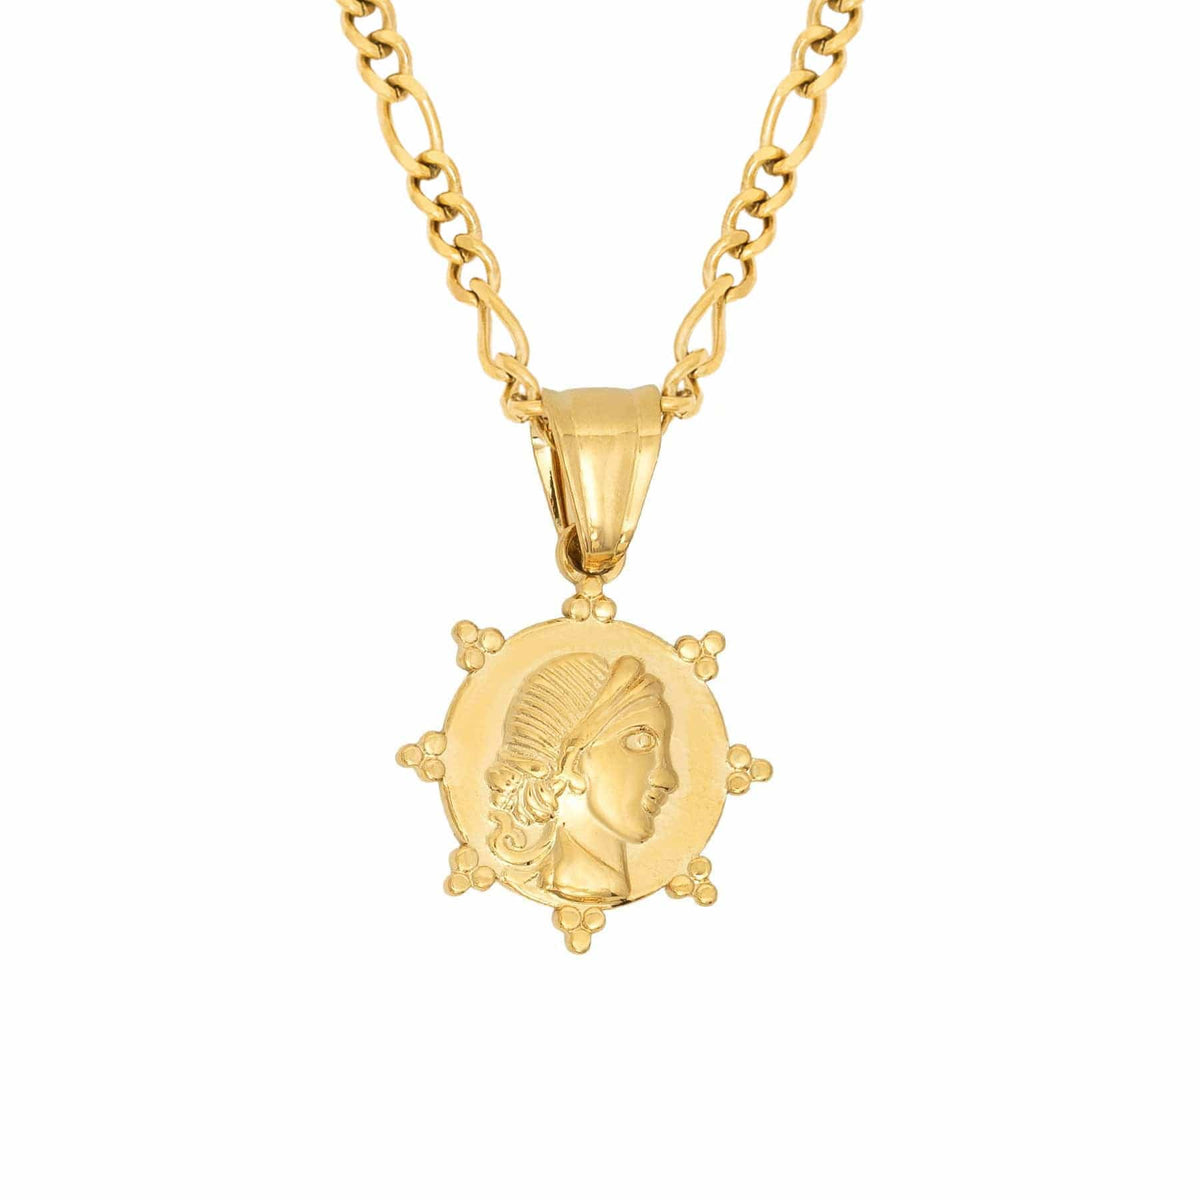 BohoMoon Stainless Steel Tesni Coin Necklace Gold